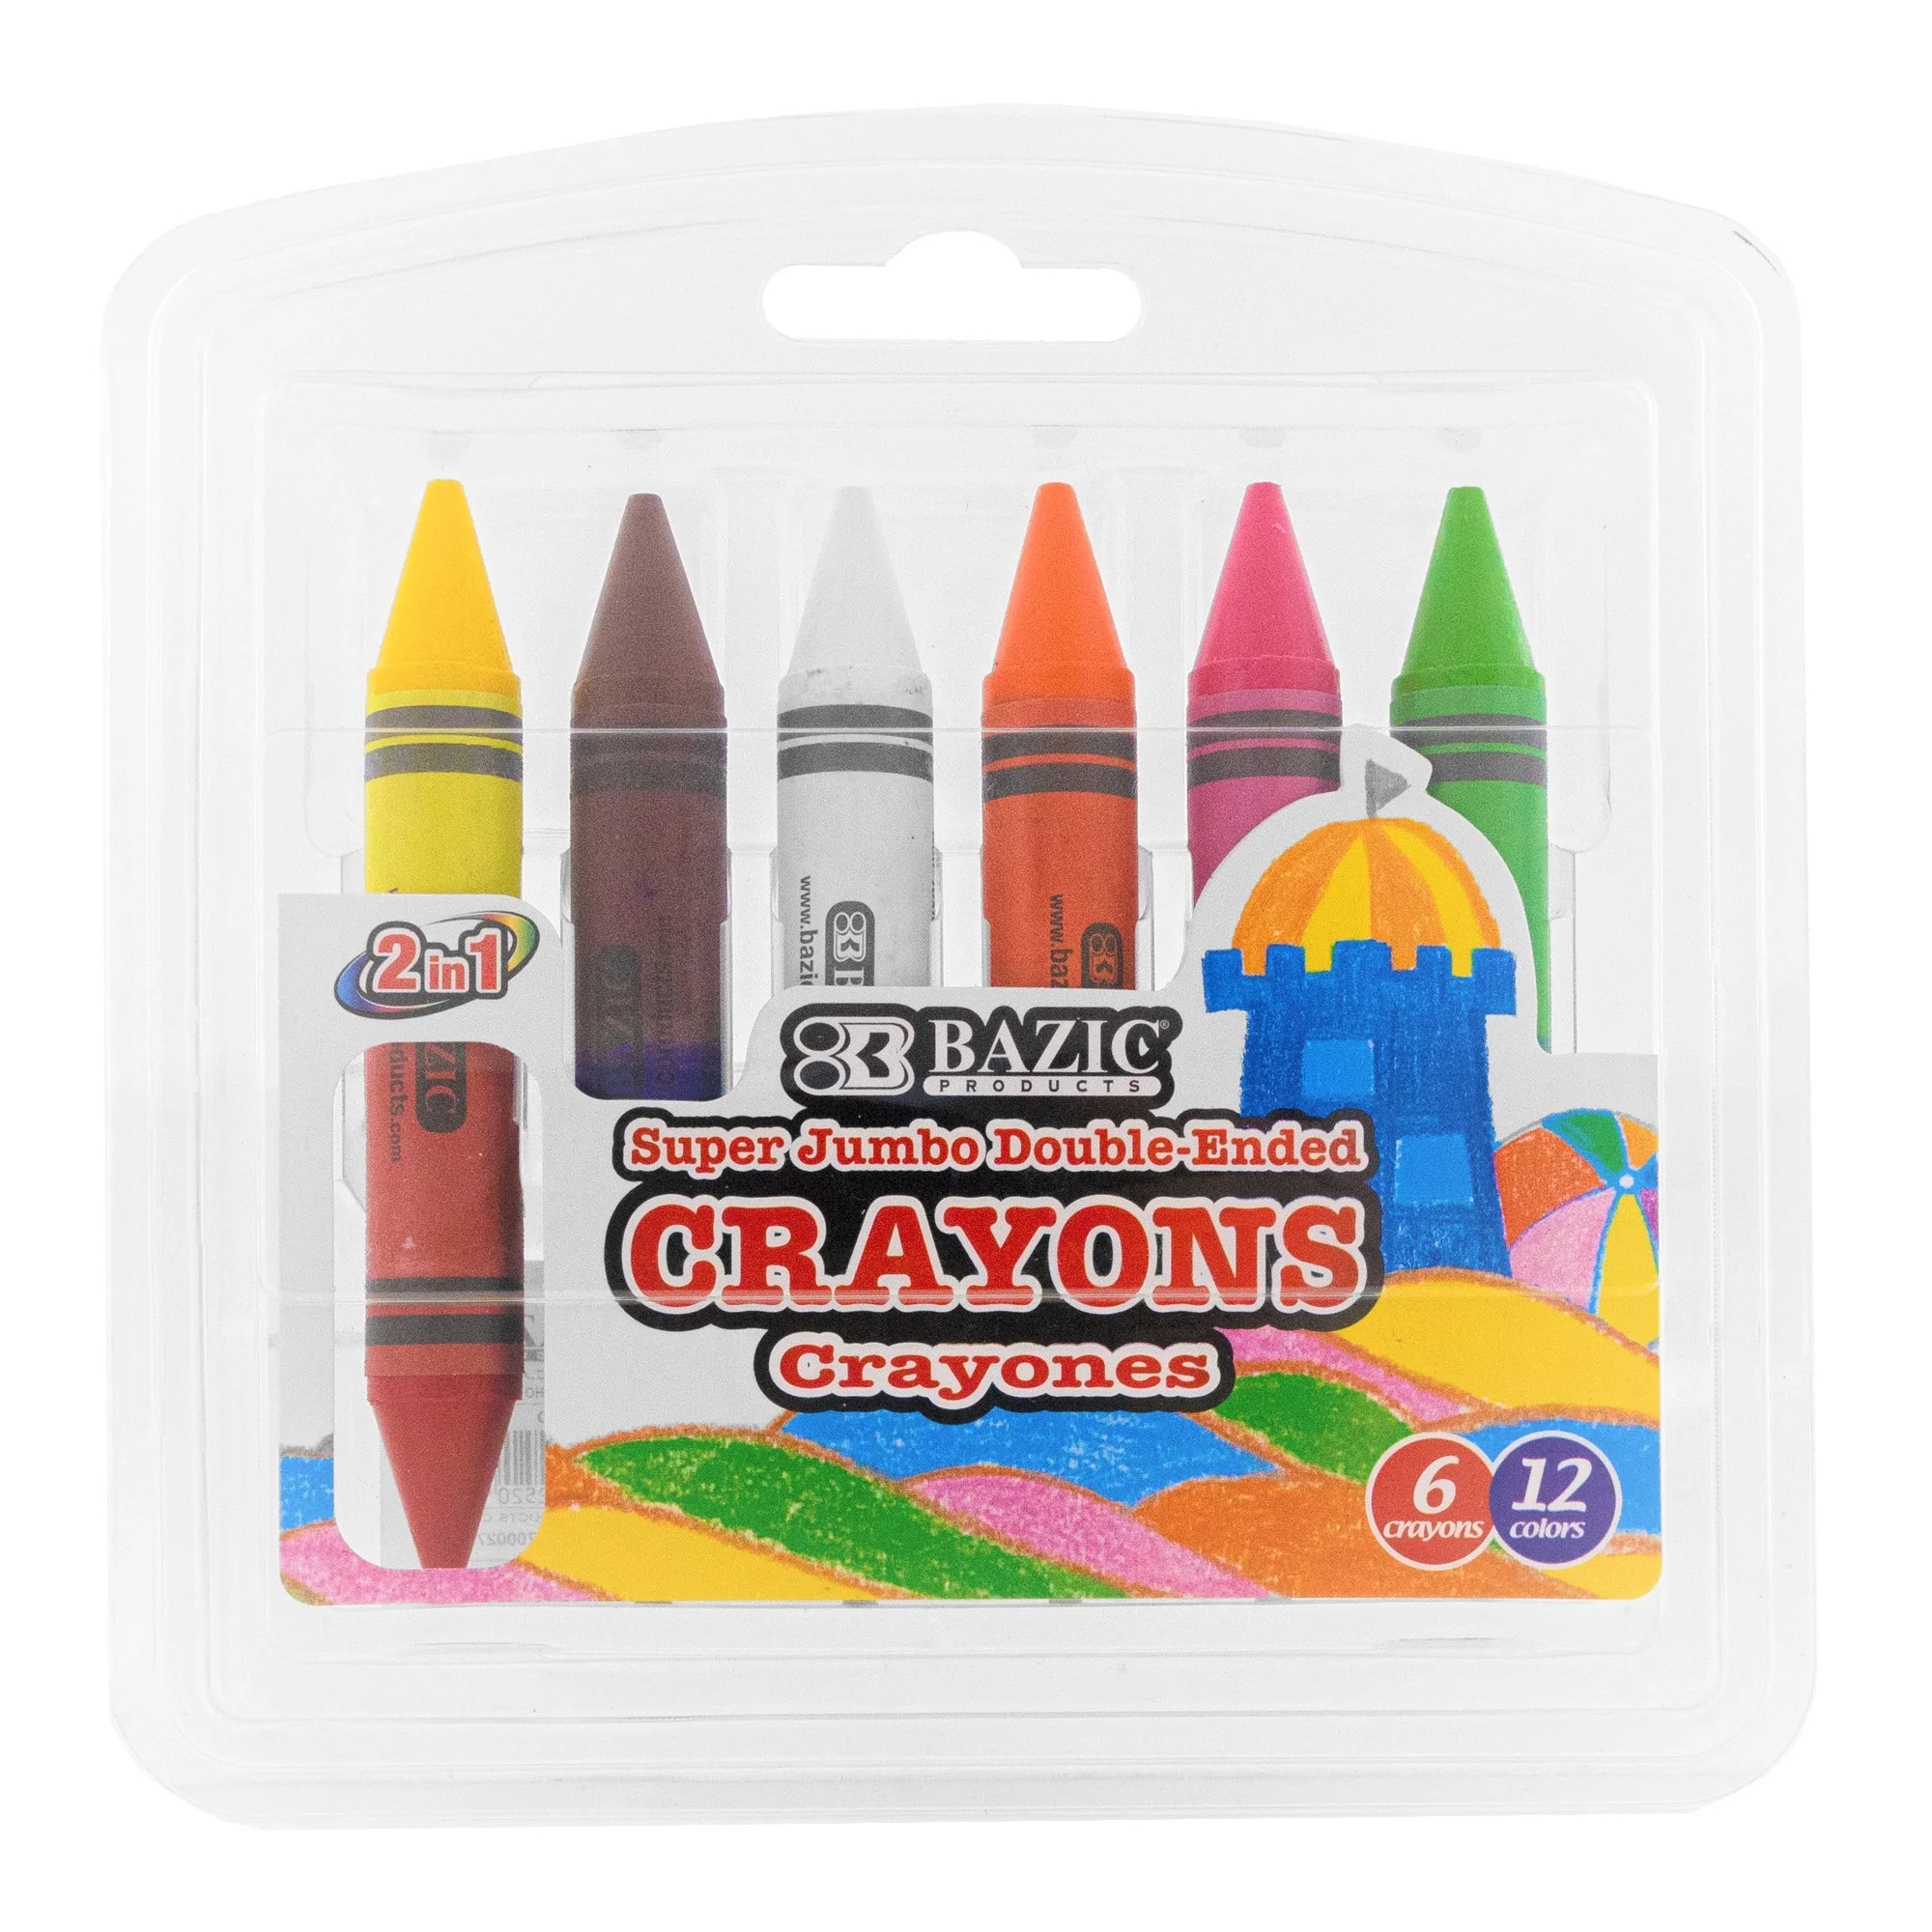 Anti-Roll Crayola Color Chalk - Assorted Color 12 Count - The CEO Creative